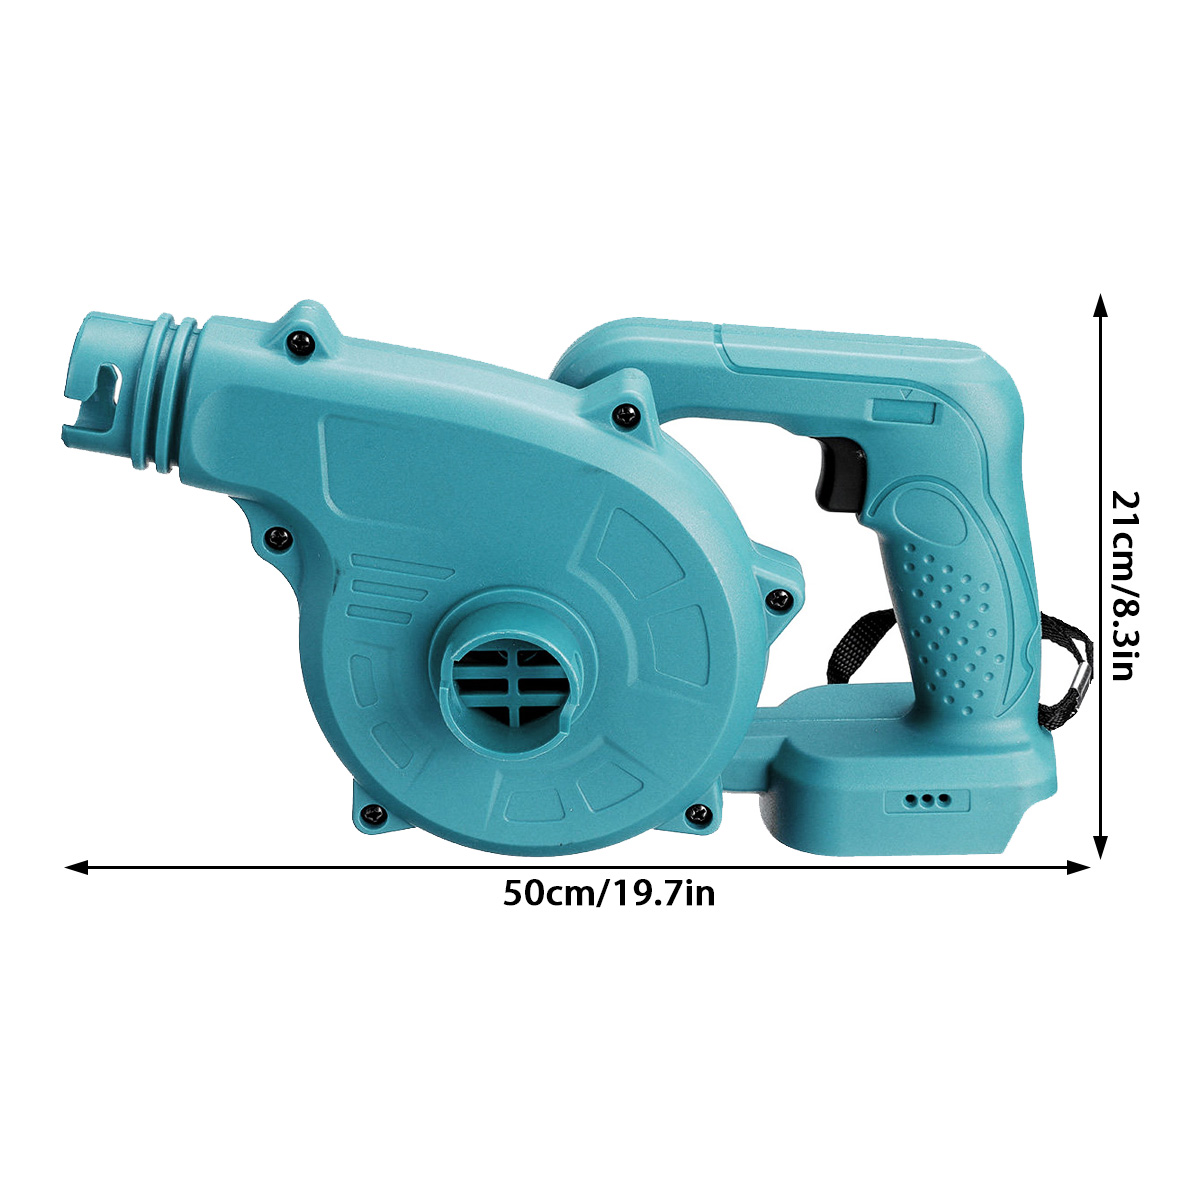 1600W-2-In-1-Cordless-Electric-Air-Blower-Dust-Leaf-Cleaner-Vacuum-Cleannig-Blowing-Tool-W-None12-Ba-1860307-15